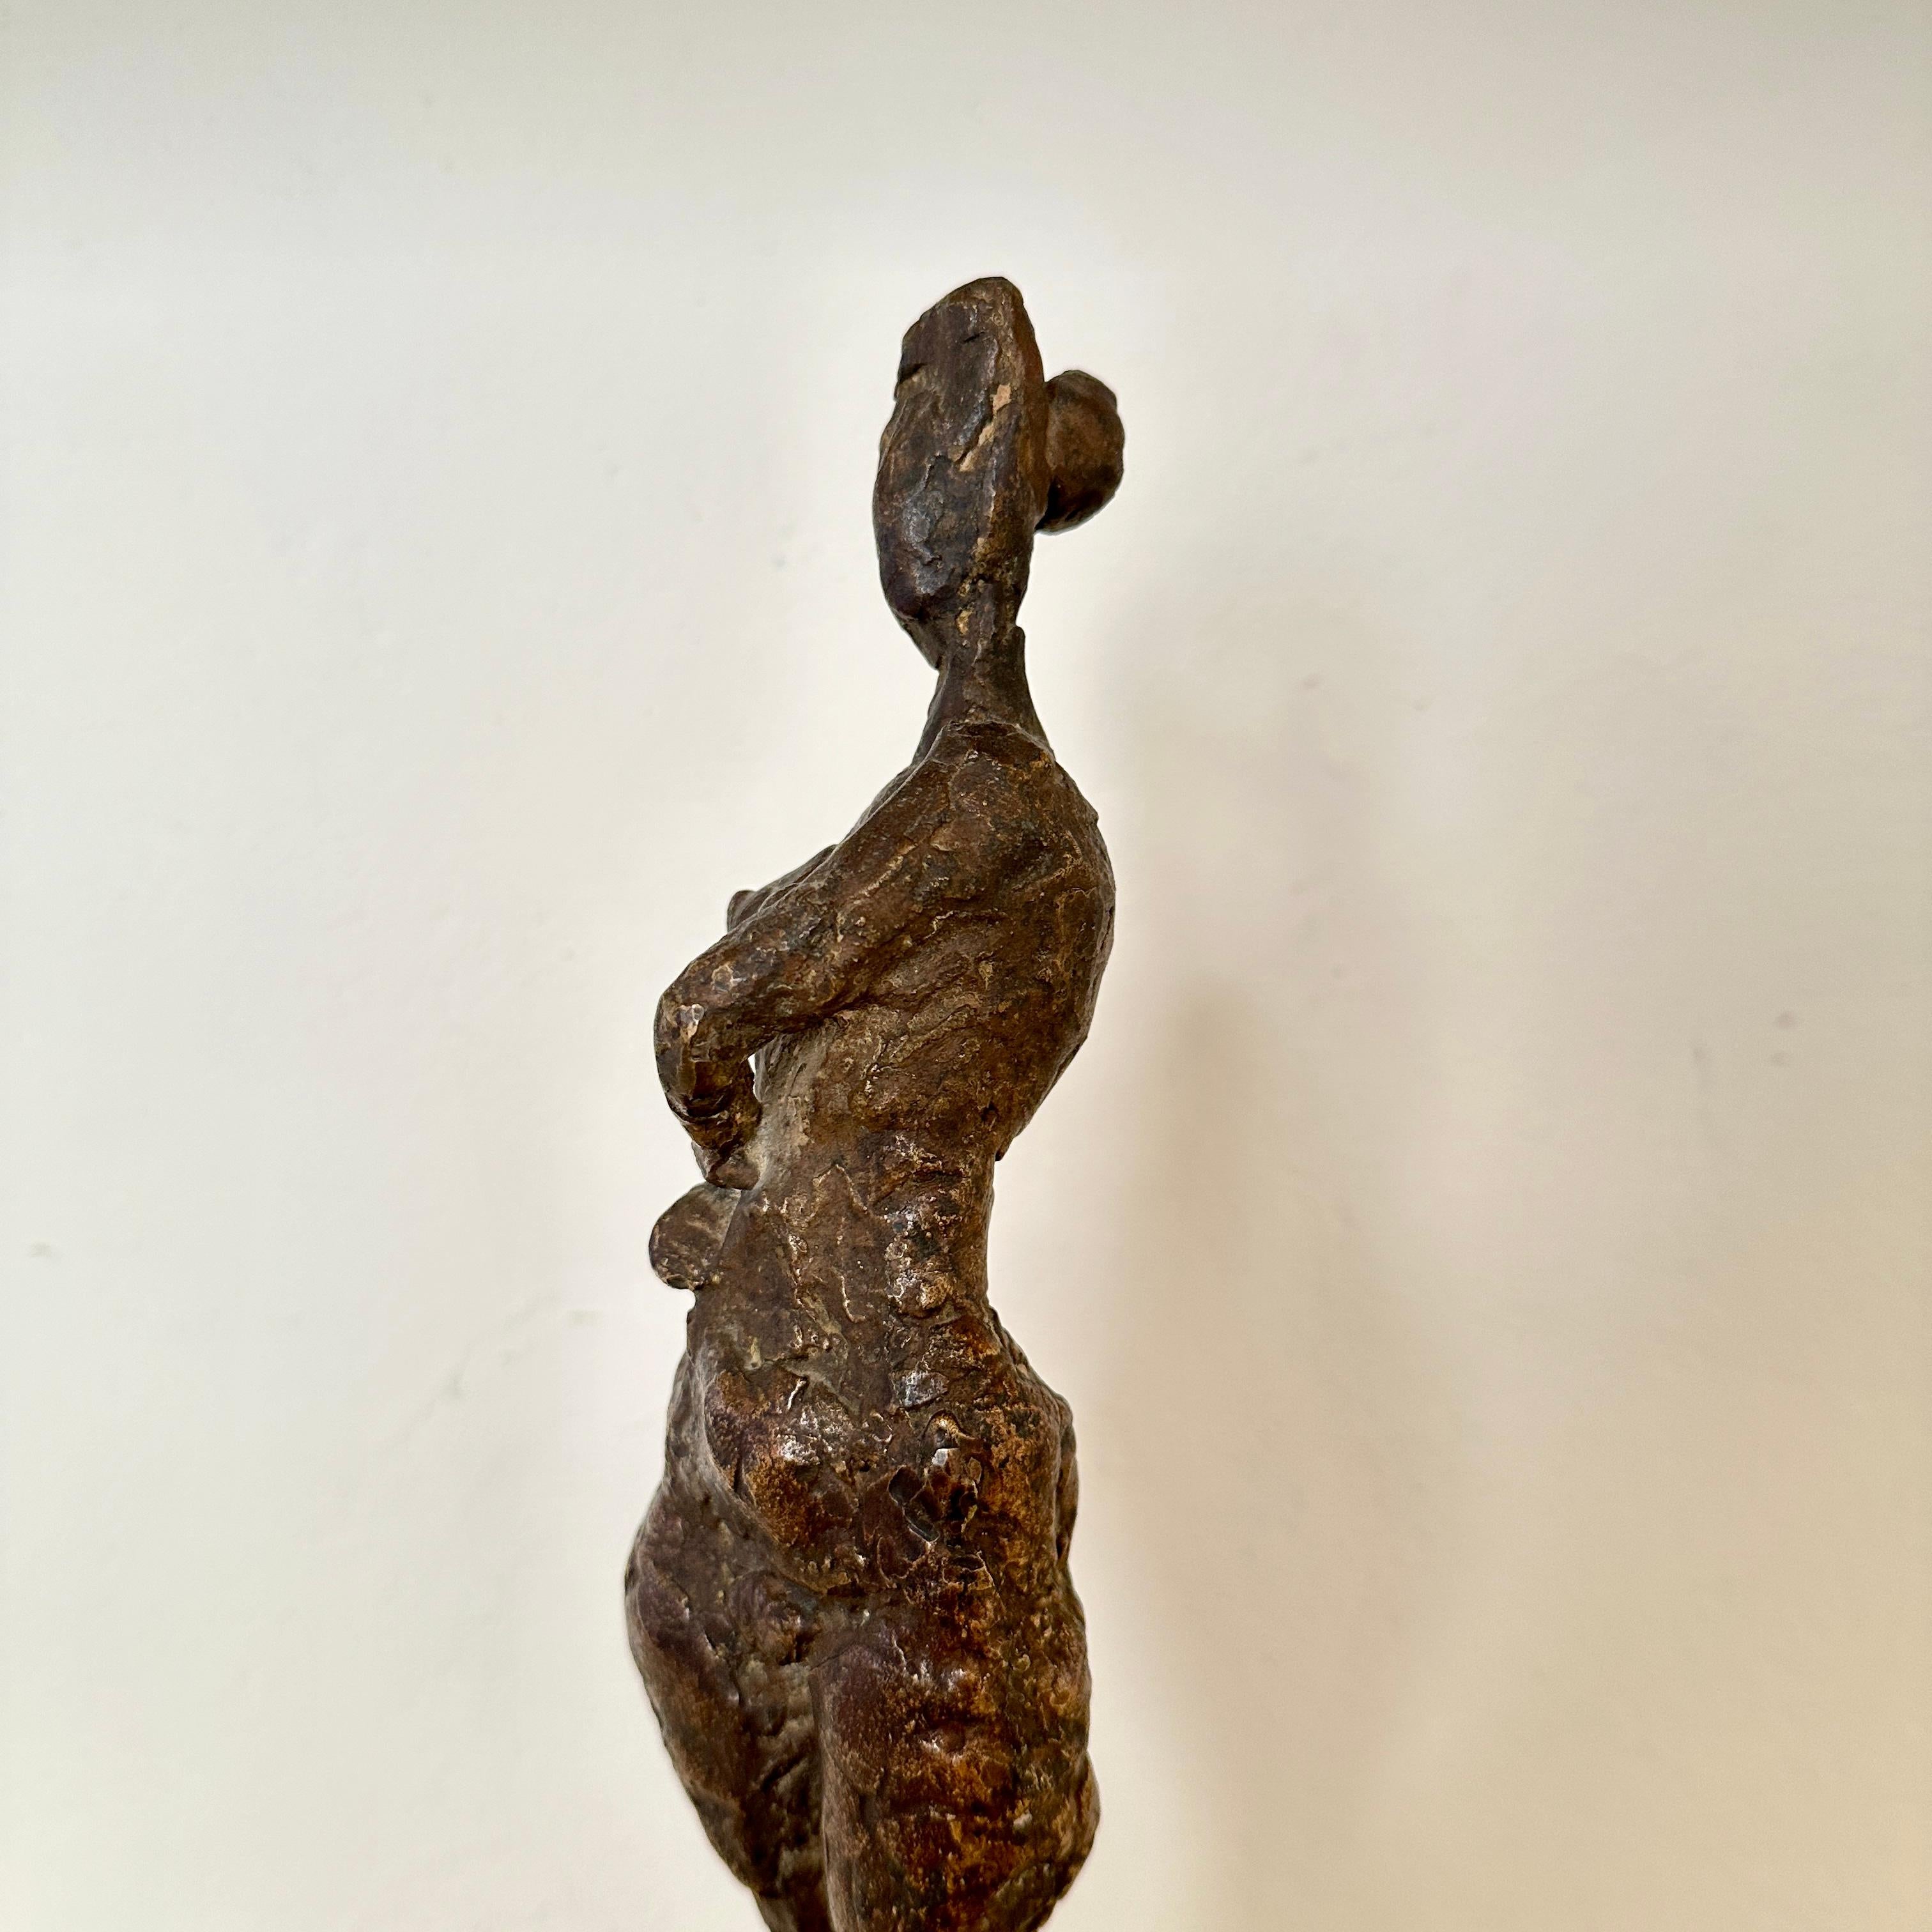 Small Cast Bronze Woman Sculpture by Oskar Bottoli on a Black Marble Stand, 1969 For Sale 1